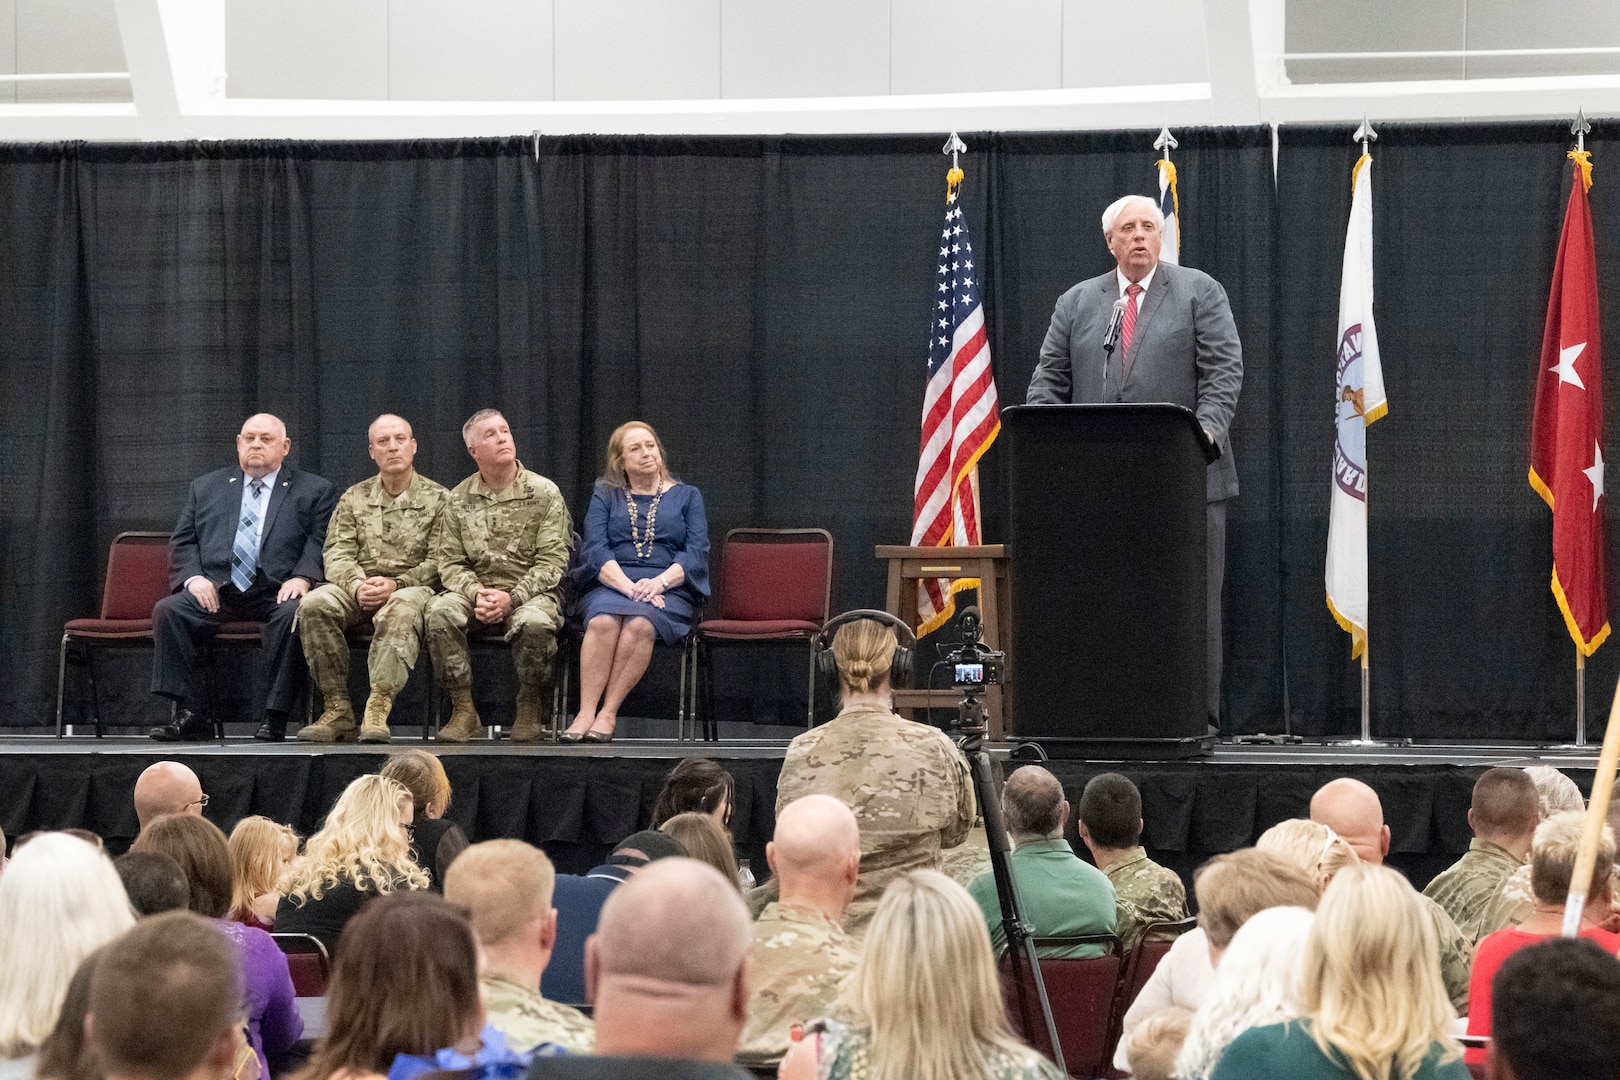 Gov. Jim Justice speaks to a crowd of Soldiers and families of the 1st Squadron, 150th Cavalry Regiment during a yellow ribbon deployment event held Aug. 16, 2019, at the Charleston Coliseum and Convention Center in Charleston, W.Va. More than 500 Soldiers of the 1st Squadron, 150th Cavalry Regiment; 1st Battalion, 201st Field Artillery Regiment; and D. Company, 230 Brigade Support Battalion, will join the North Carolina National Guard’s 30th Armored Brigade Combat Team (ABCT) for a deployment to the Middle East in support of Operation Spartan Shield in the coming months. (U.S. Army National Guard photo by Bo Wriston)